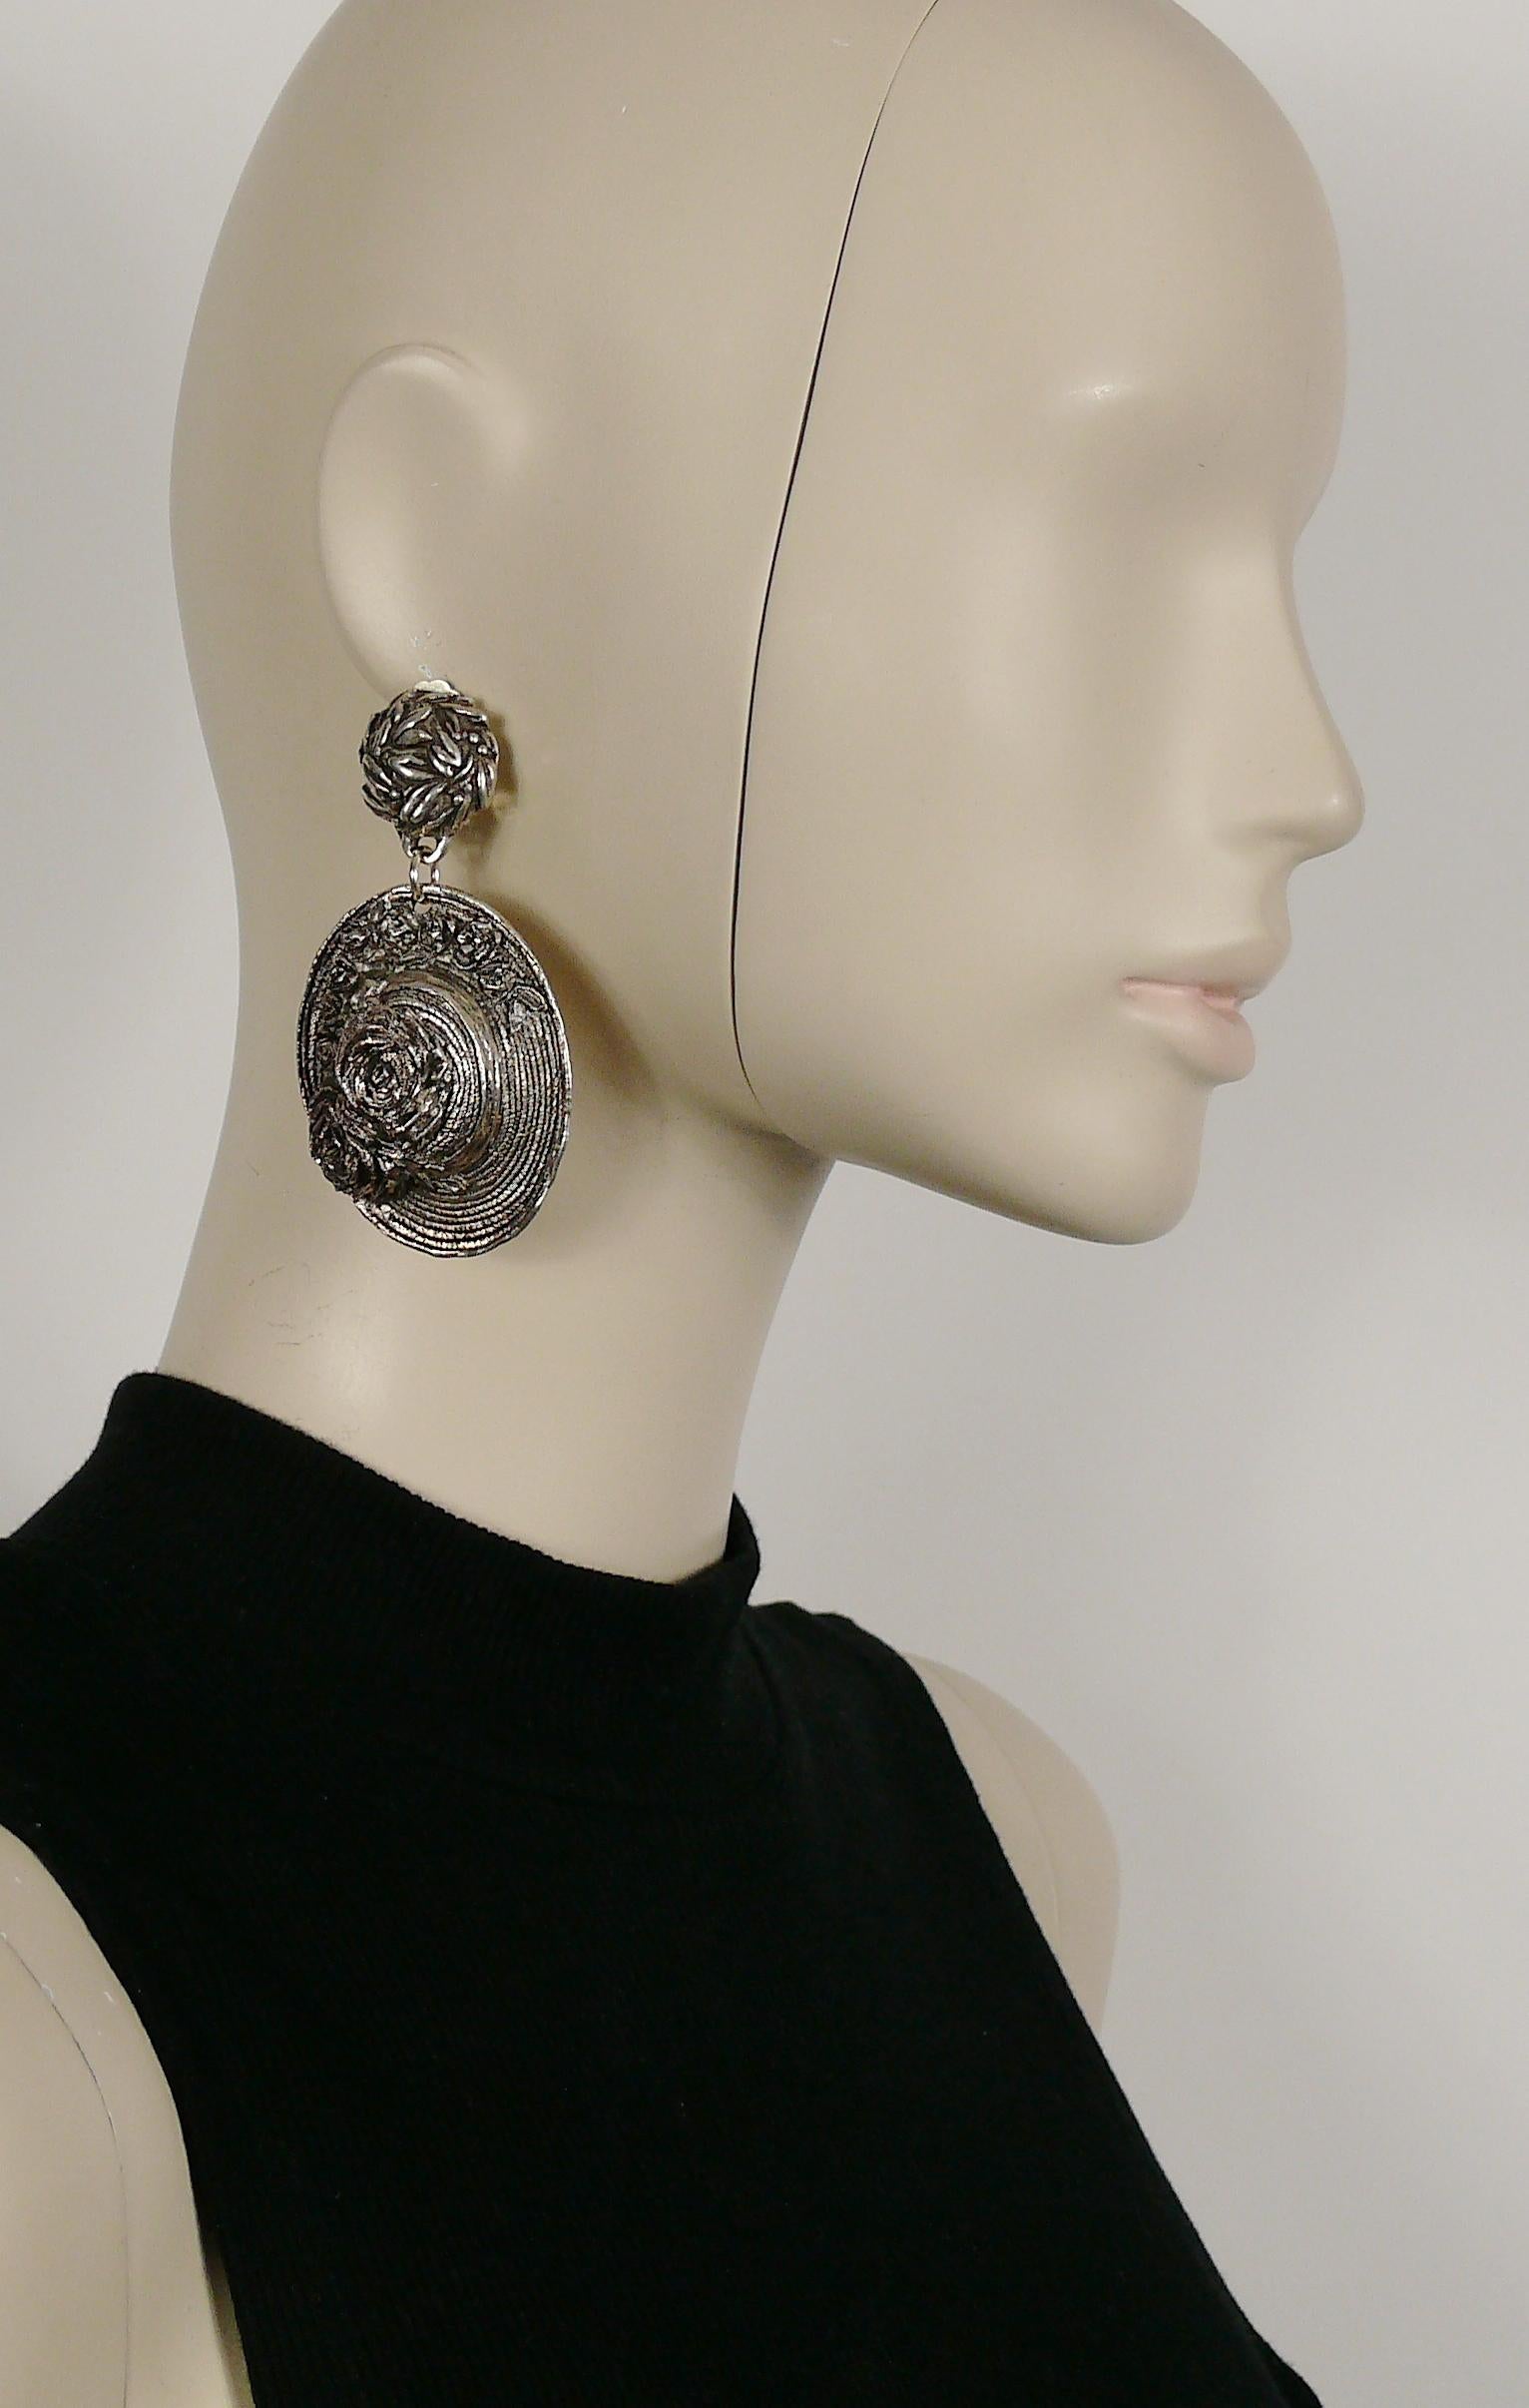 CHANTAL THOMASS vintage rare massive dangling earrings (clip-on) featuring hats with flowers in silver tone with antiqued patina.

Embossed CHANTAL THOMASS.

Indicative measurements : height approx. 8 cm (3.15 inches) / max. width 4 cm (1.57